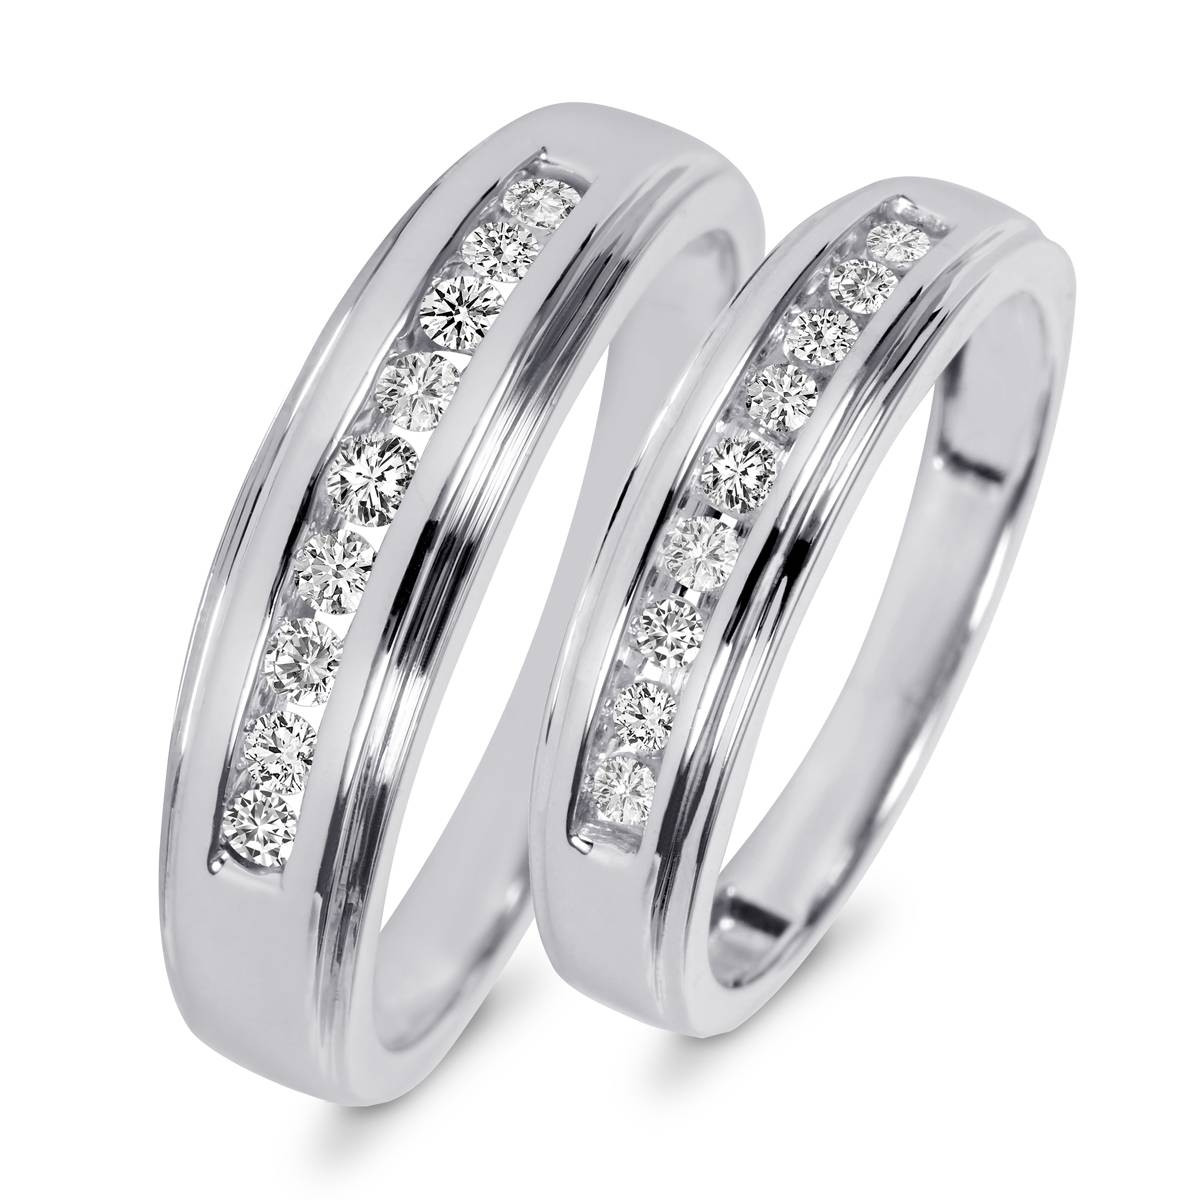 Cheap Wedding Band Sets For Him And Her
 15 Inspirations of Cheap Wedding Bands Sets His And Hers